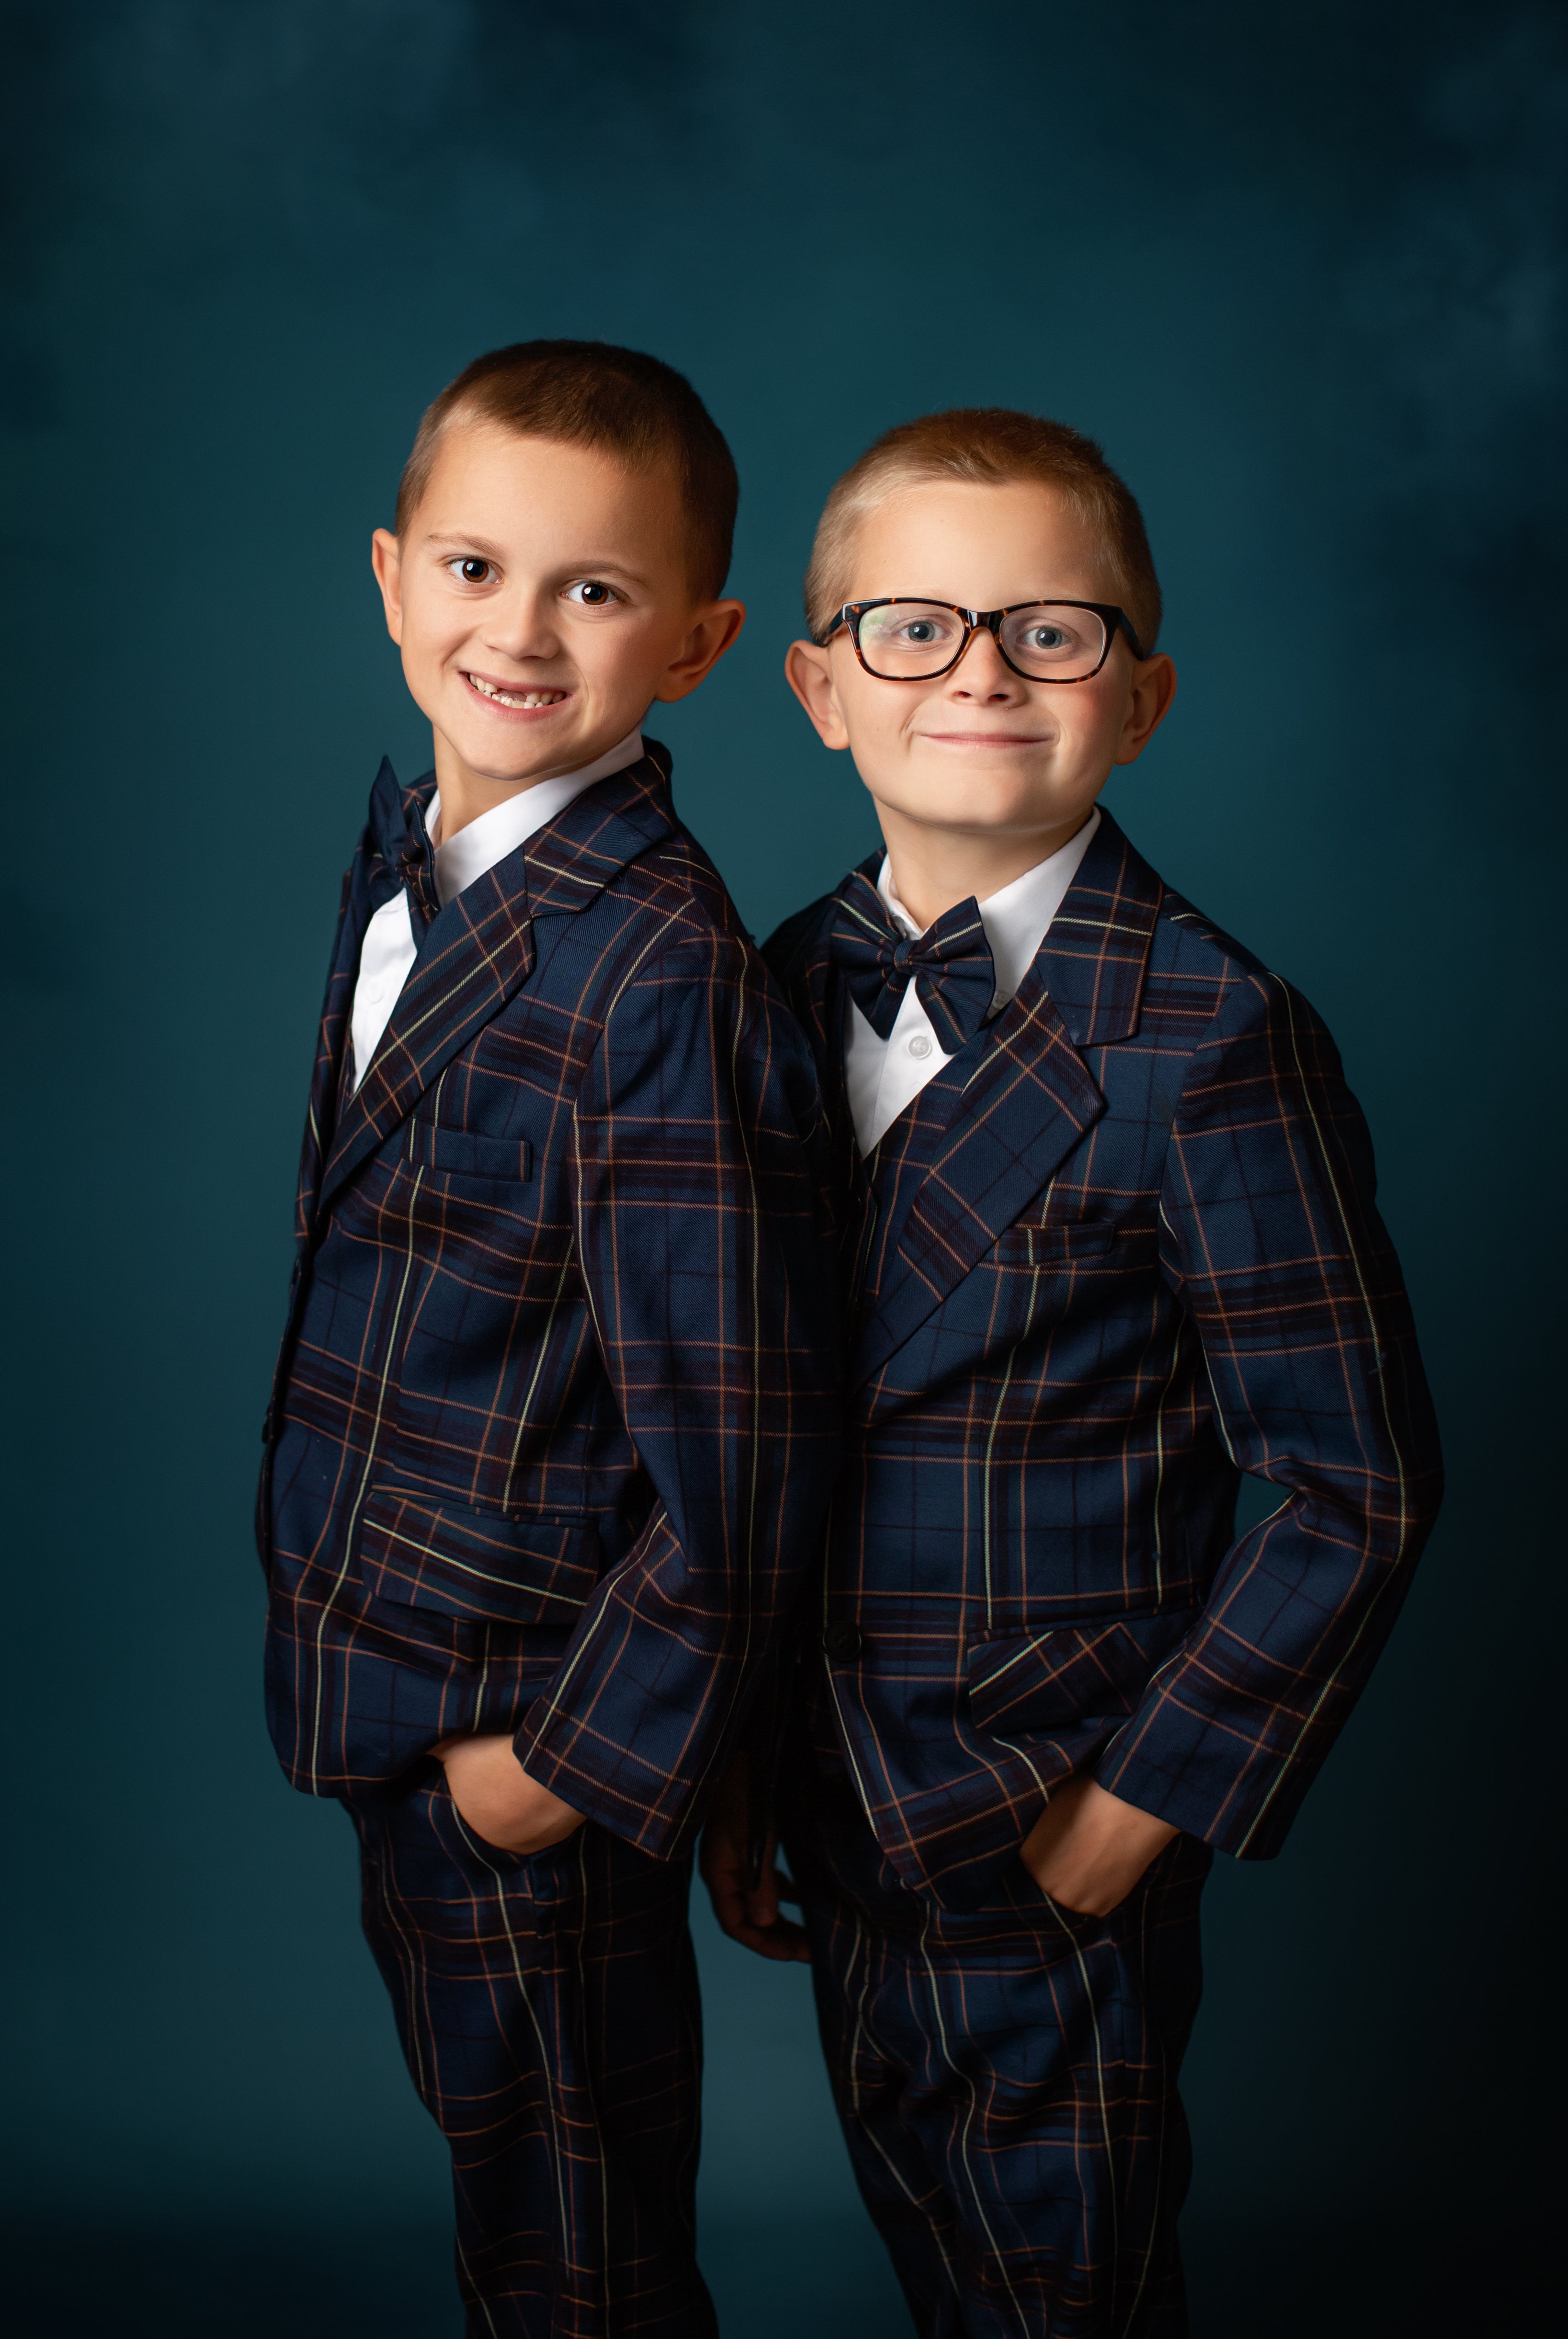 Boys custom suits - custom-order suits – now tailored to perfection